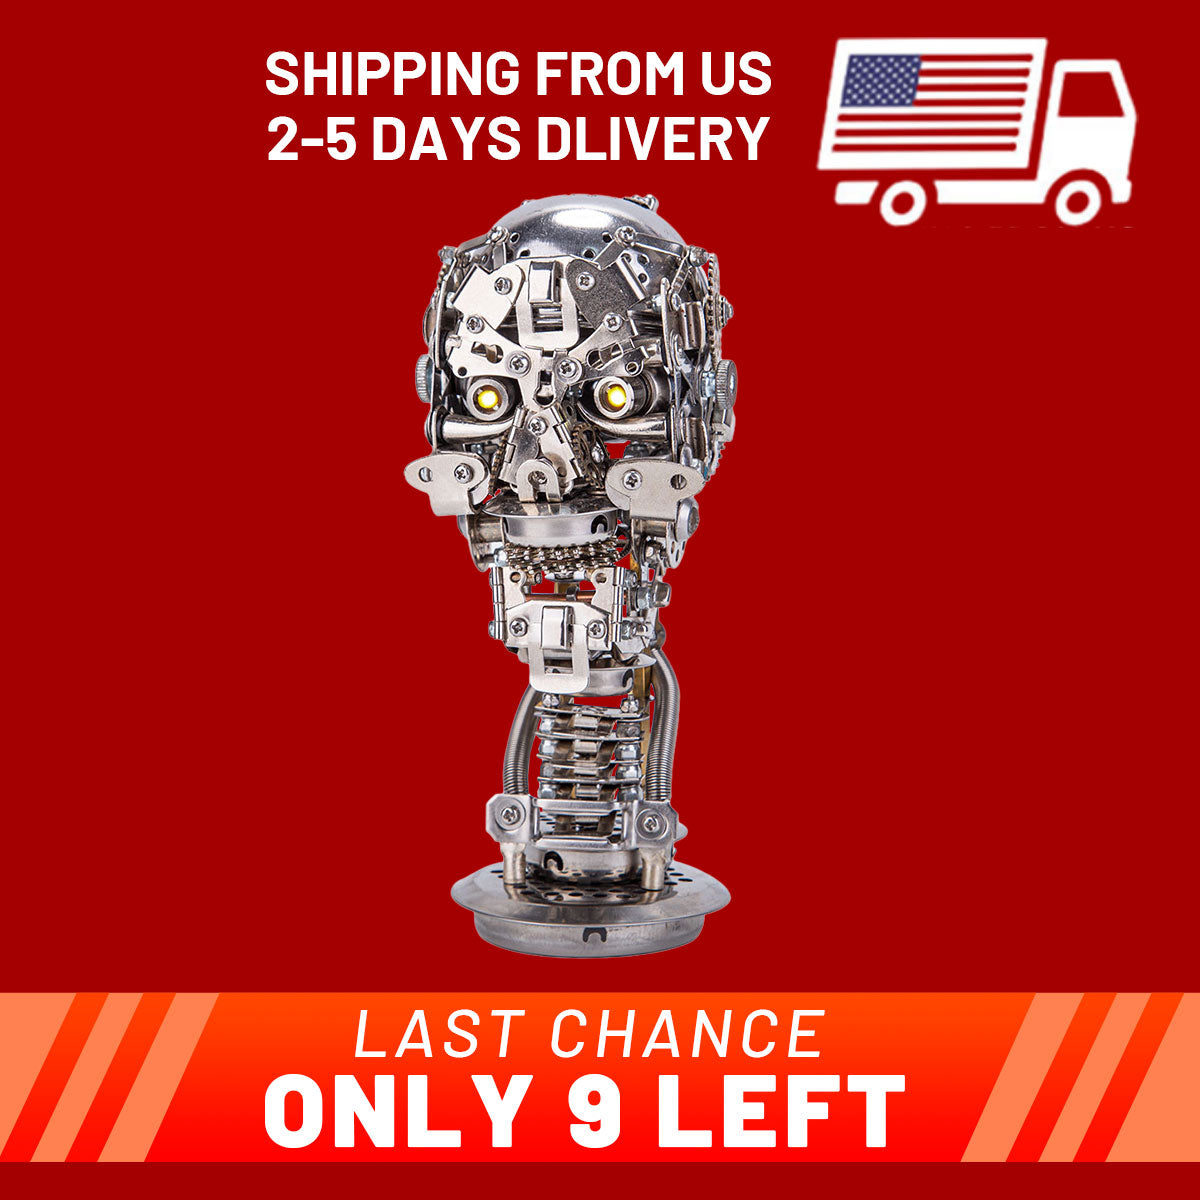 skull-head-3d-metal-puzzle-shipping from-usa-directly-christmas-stirlingkit-official-website (5).jpg__PID:b1365e66-89bd-401e-8c64-d4aaa3a50694